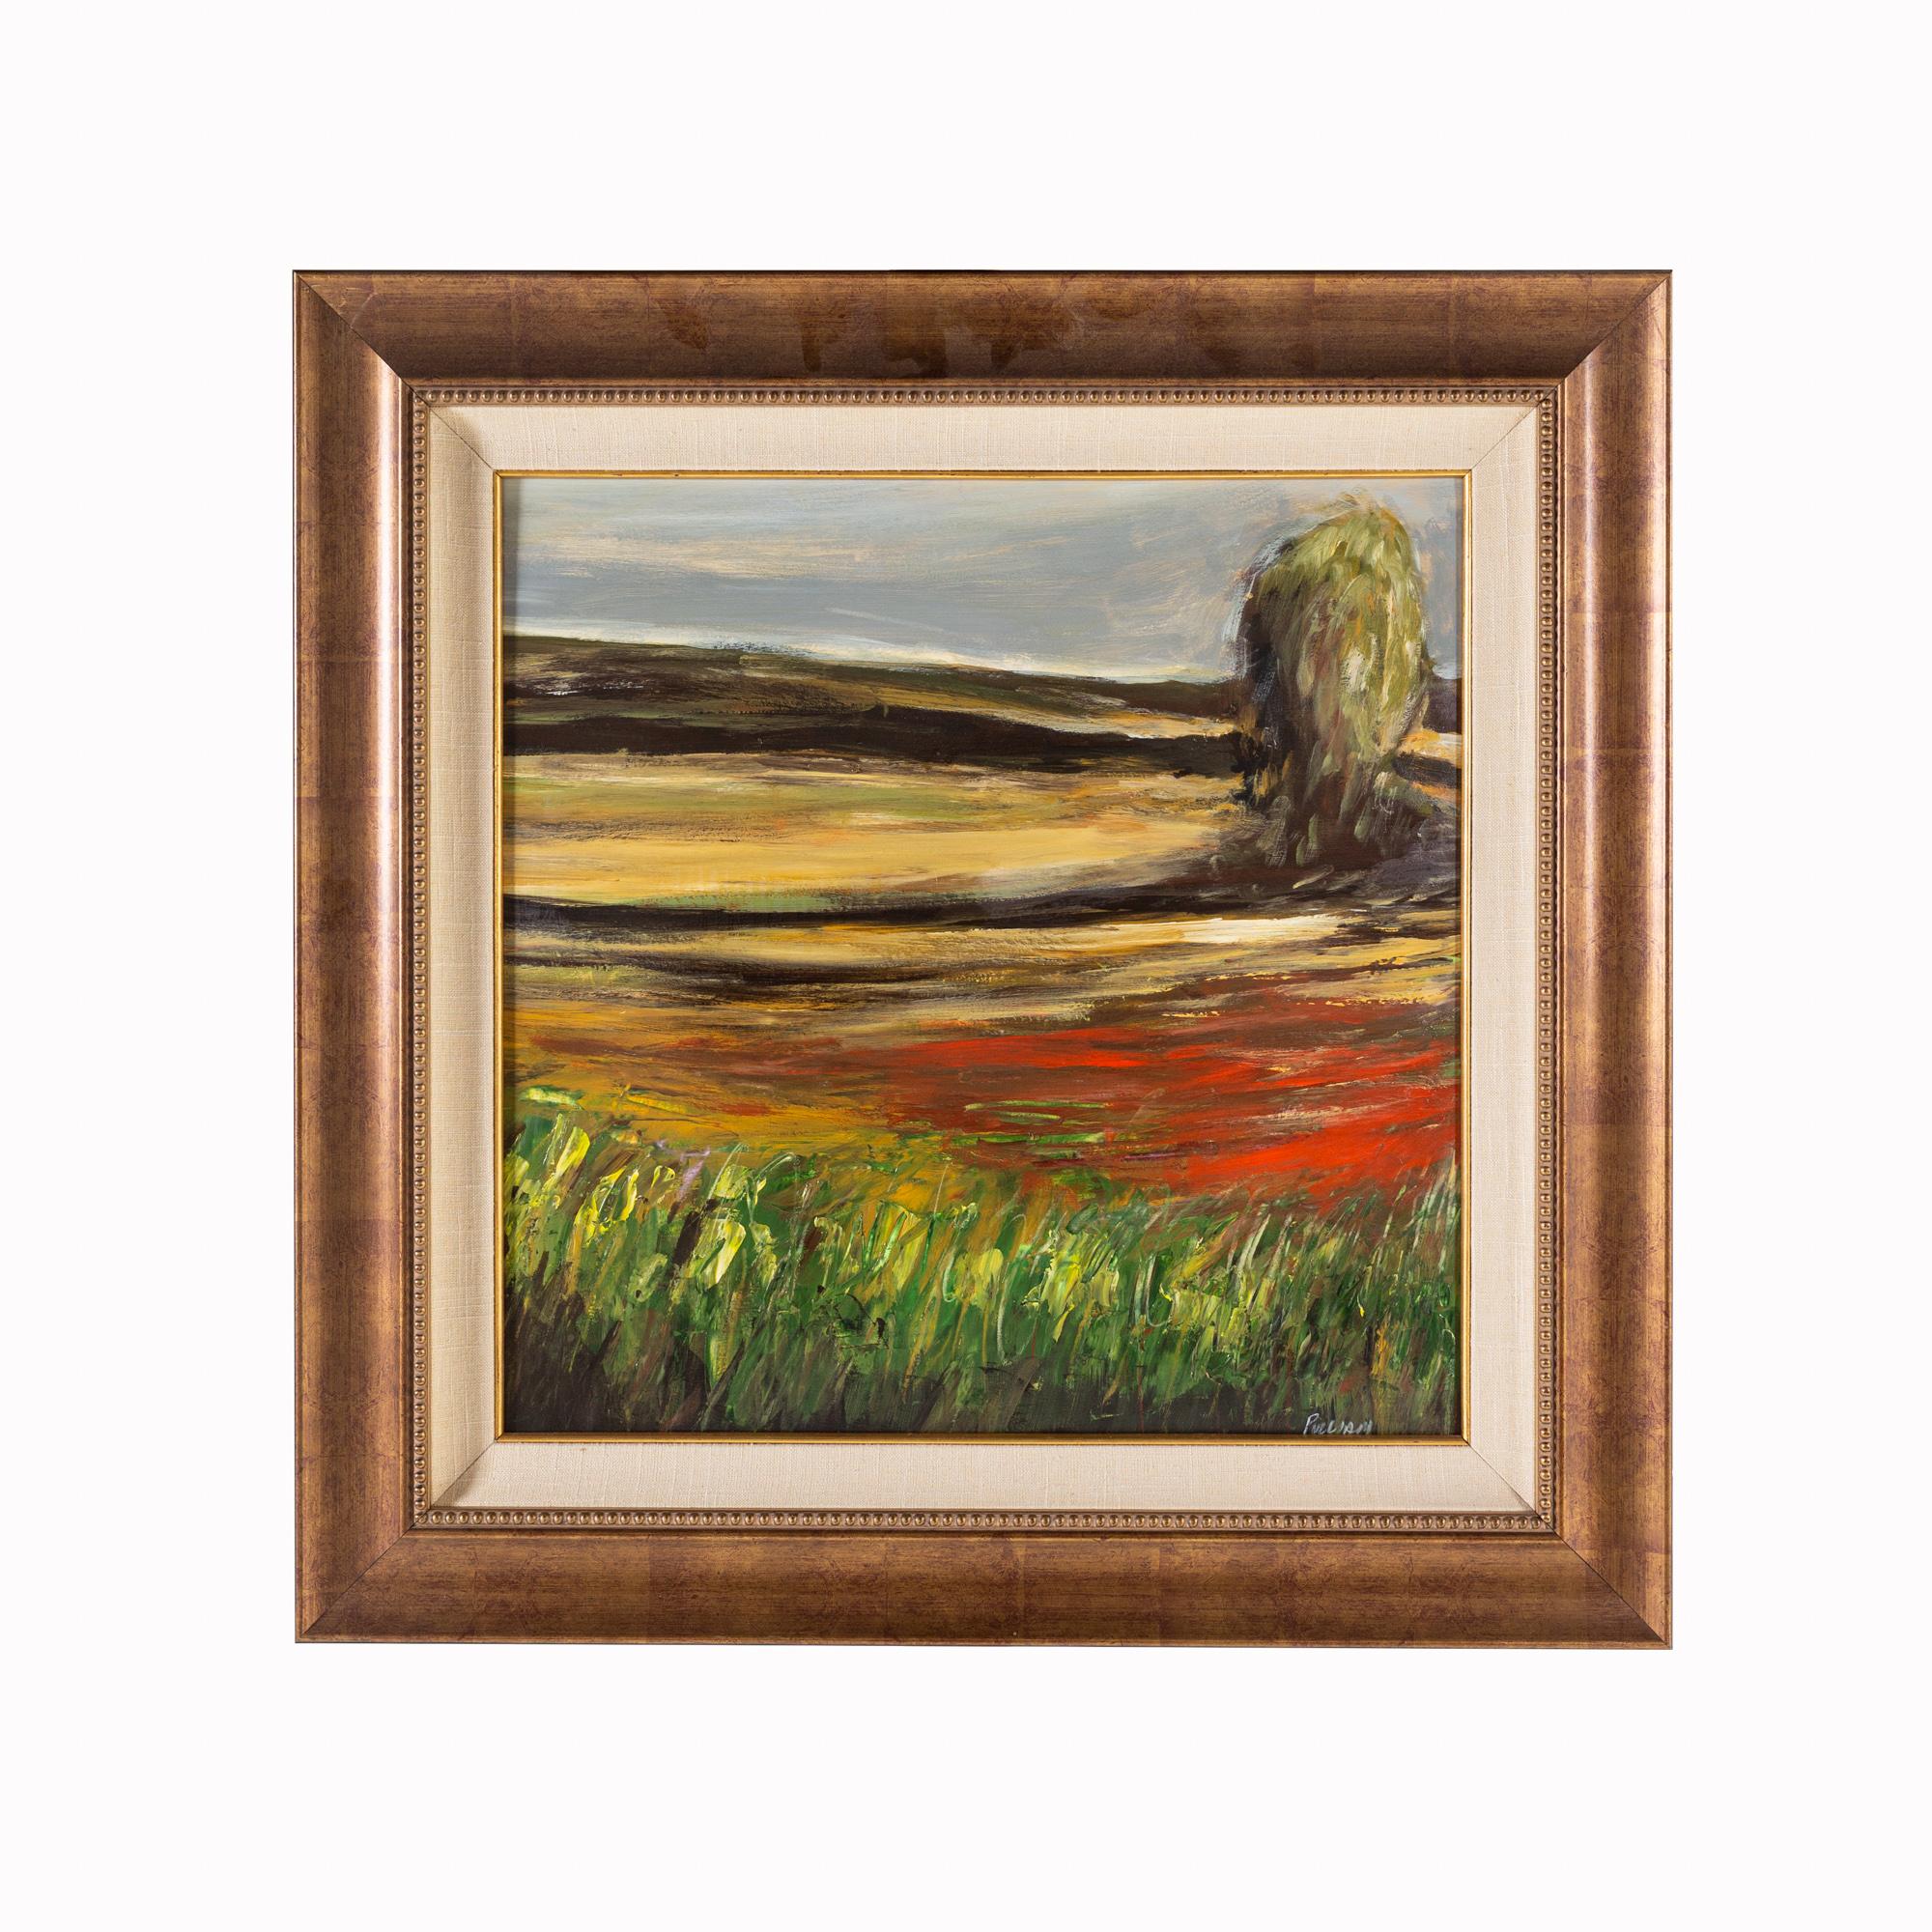 Landscape painting oil on canvas Signed Pulliam

This painting measures: 30 wide x 1 deep x 30 inches high

This painting is in Good Vintage Condition with missing glass and minor marks, dents, and wear.

We take our photos in a controlled